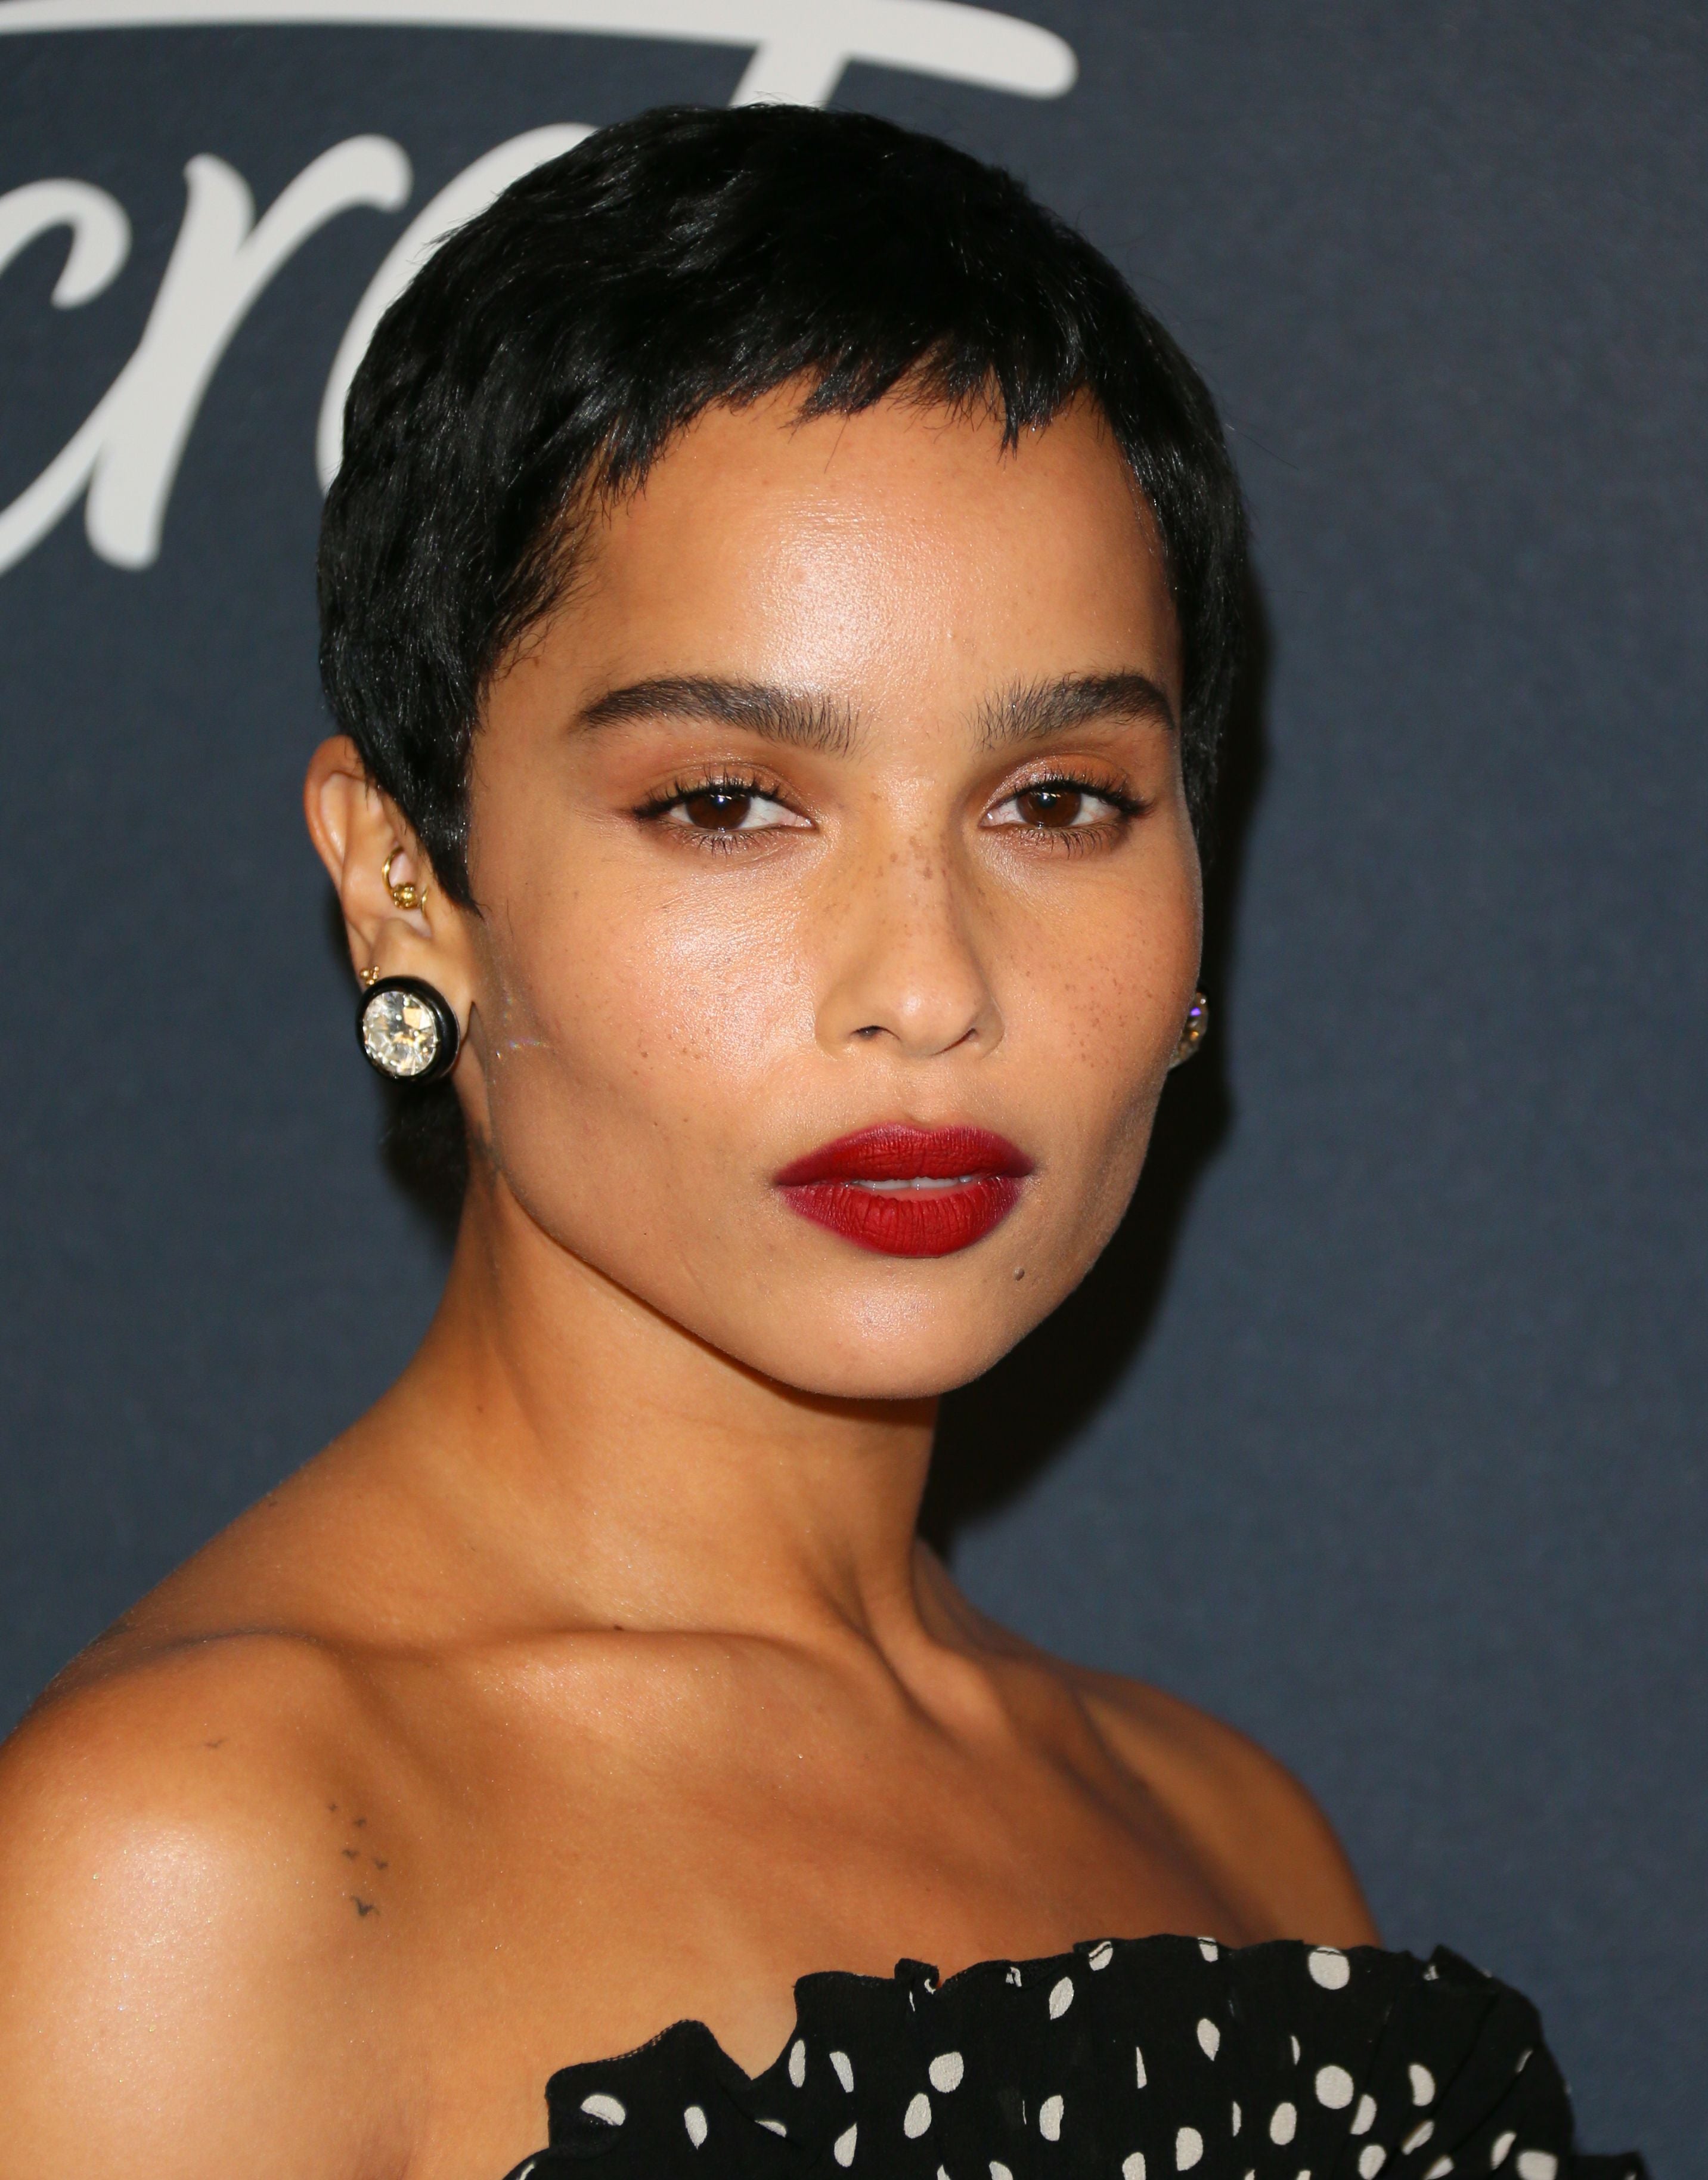 The Best Beauty Looks From The Golden Globes After-Party